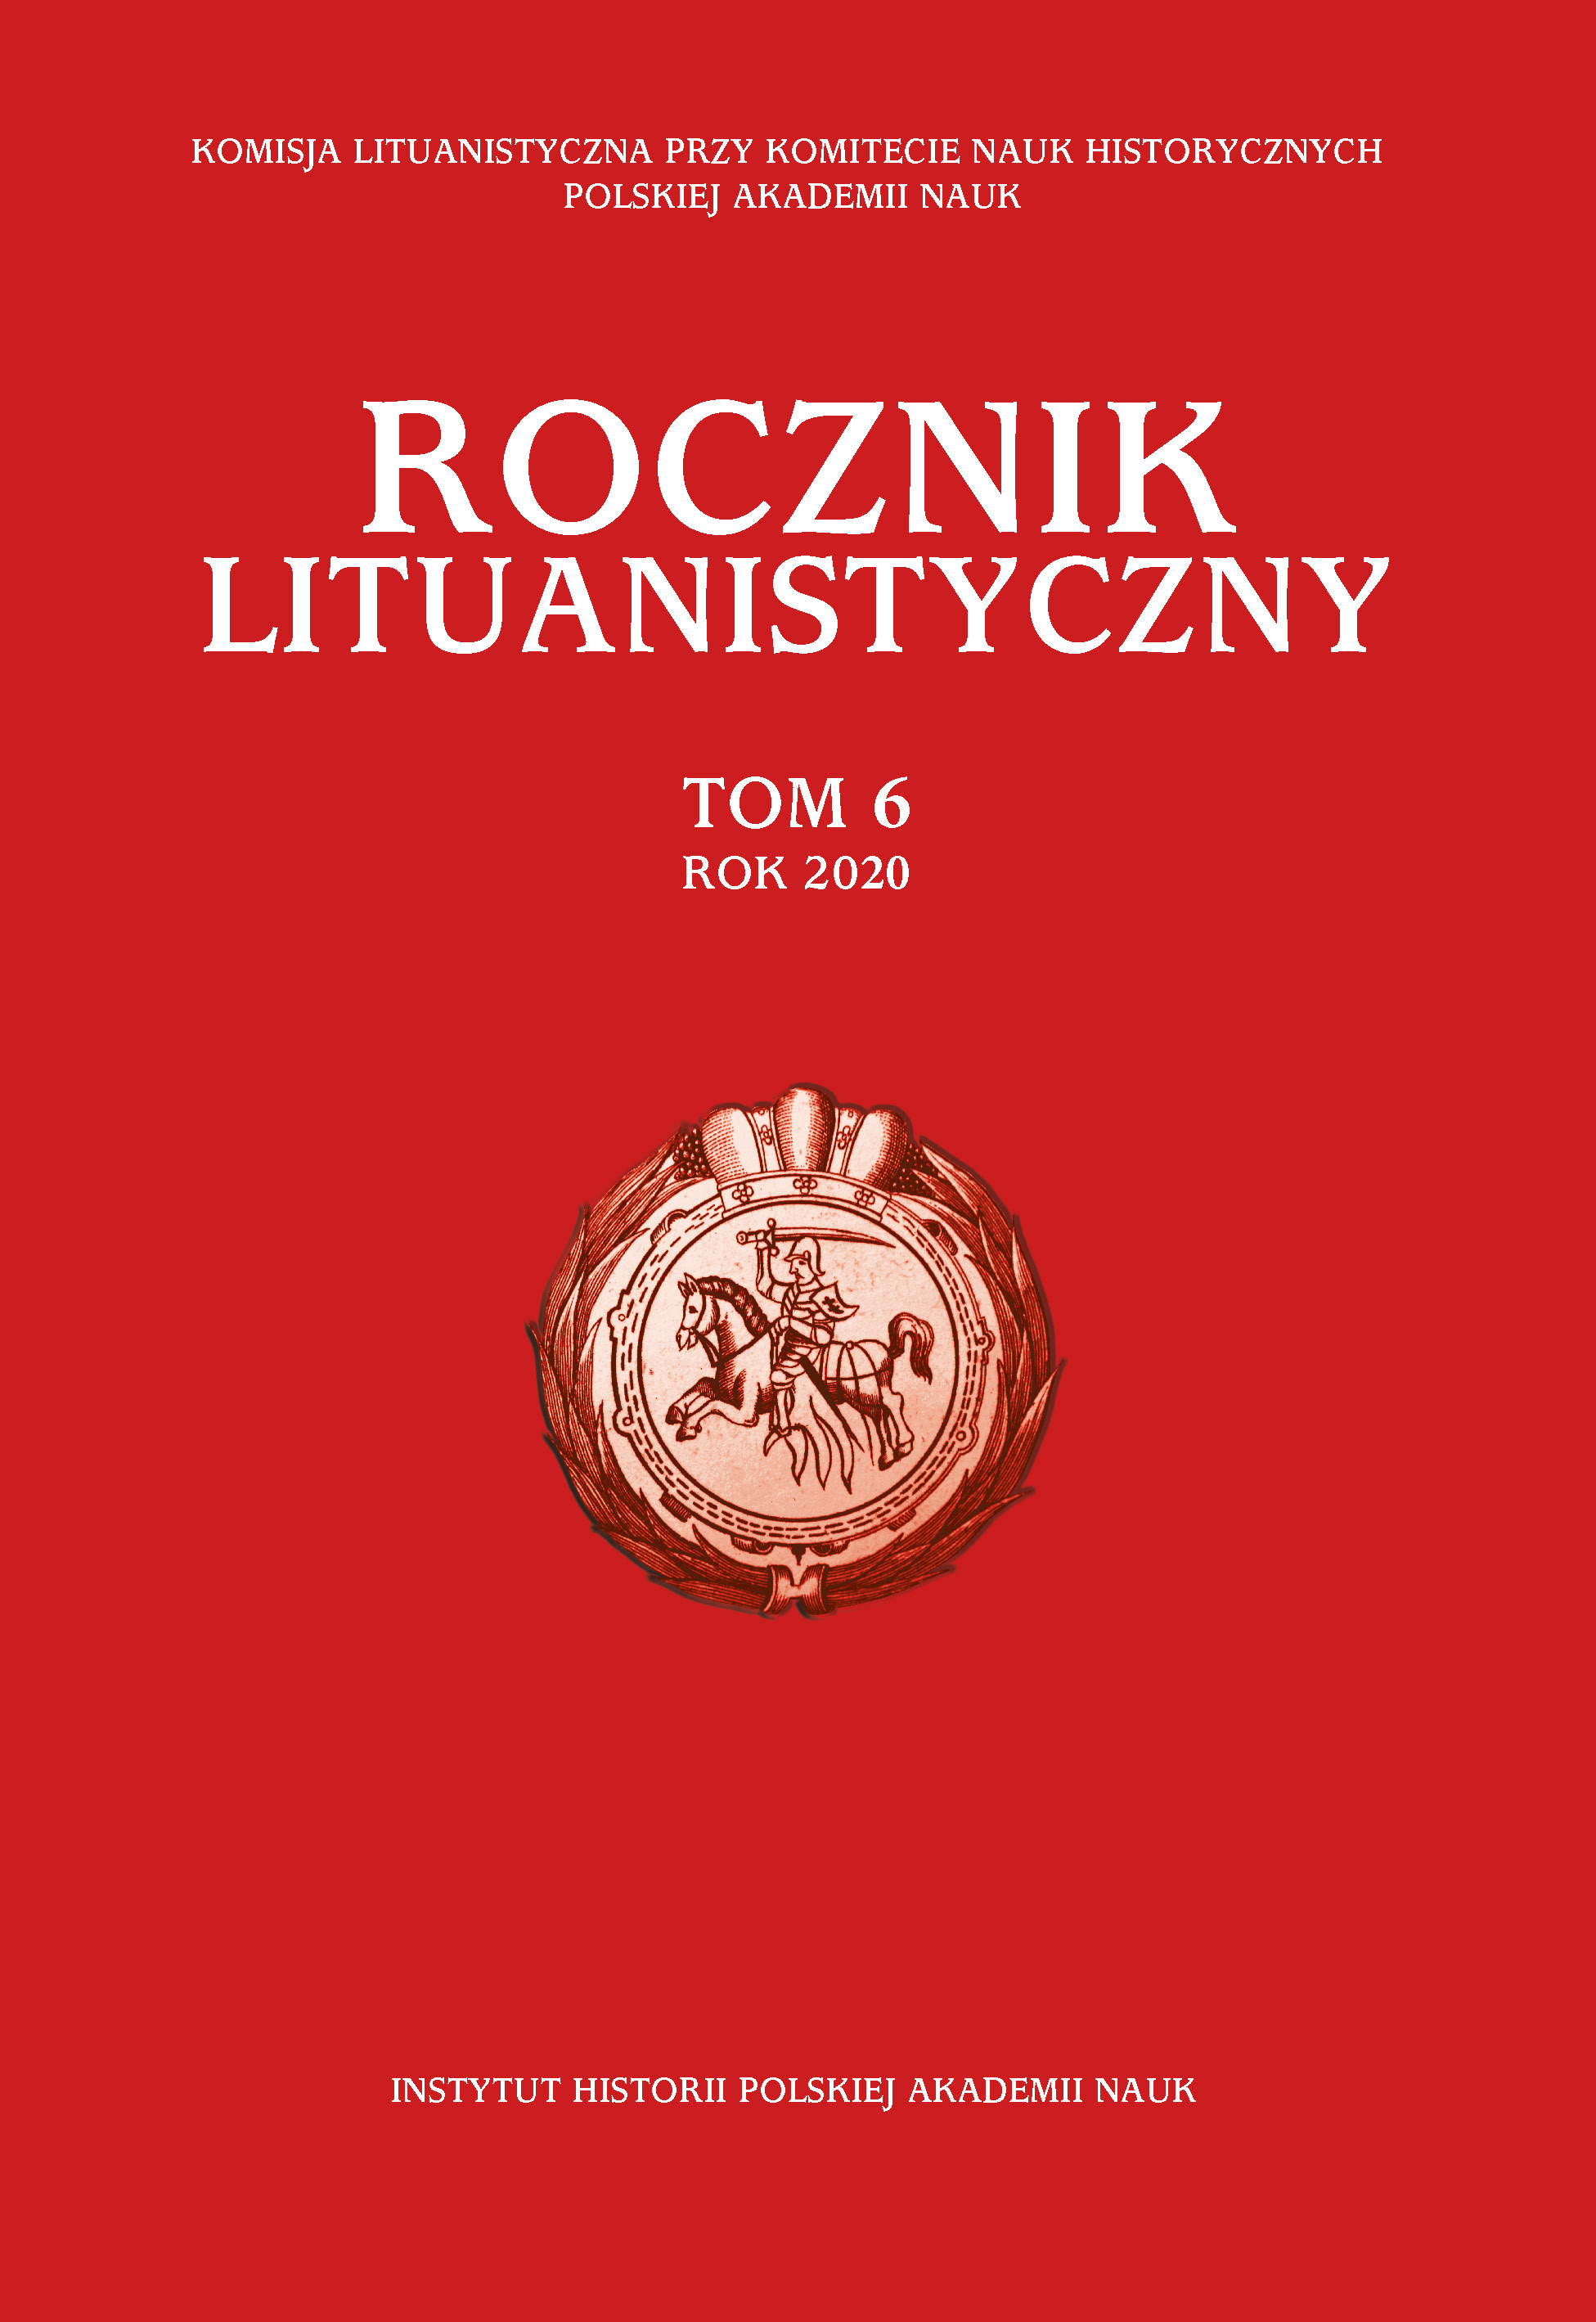 Research on the Management and Exploitation of the Grand-Ducal Domain Water Resources in the Grand Duchy of Lithuania in the Light of Issued Acts of the Lithuanian Metrica (until the End of the Sixteenth Century) Cover Image